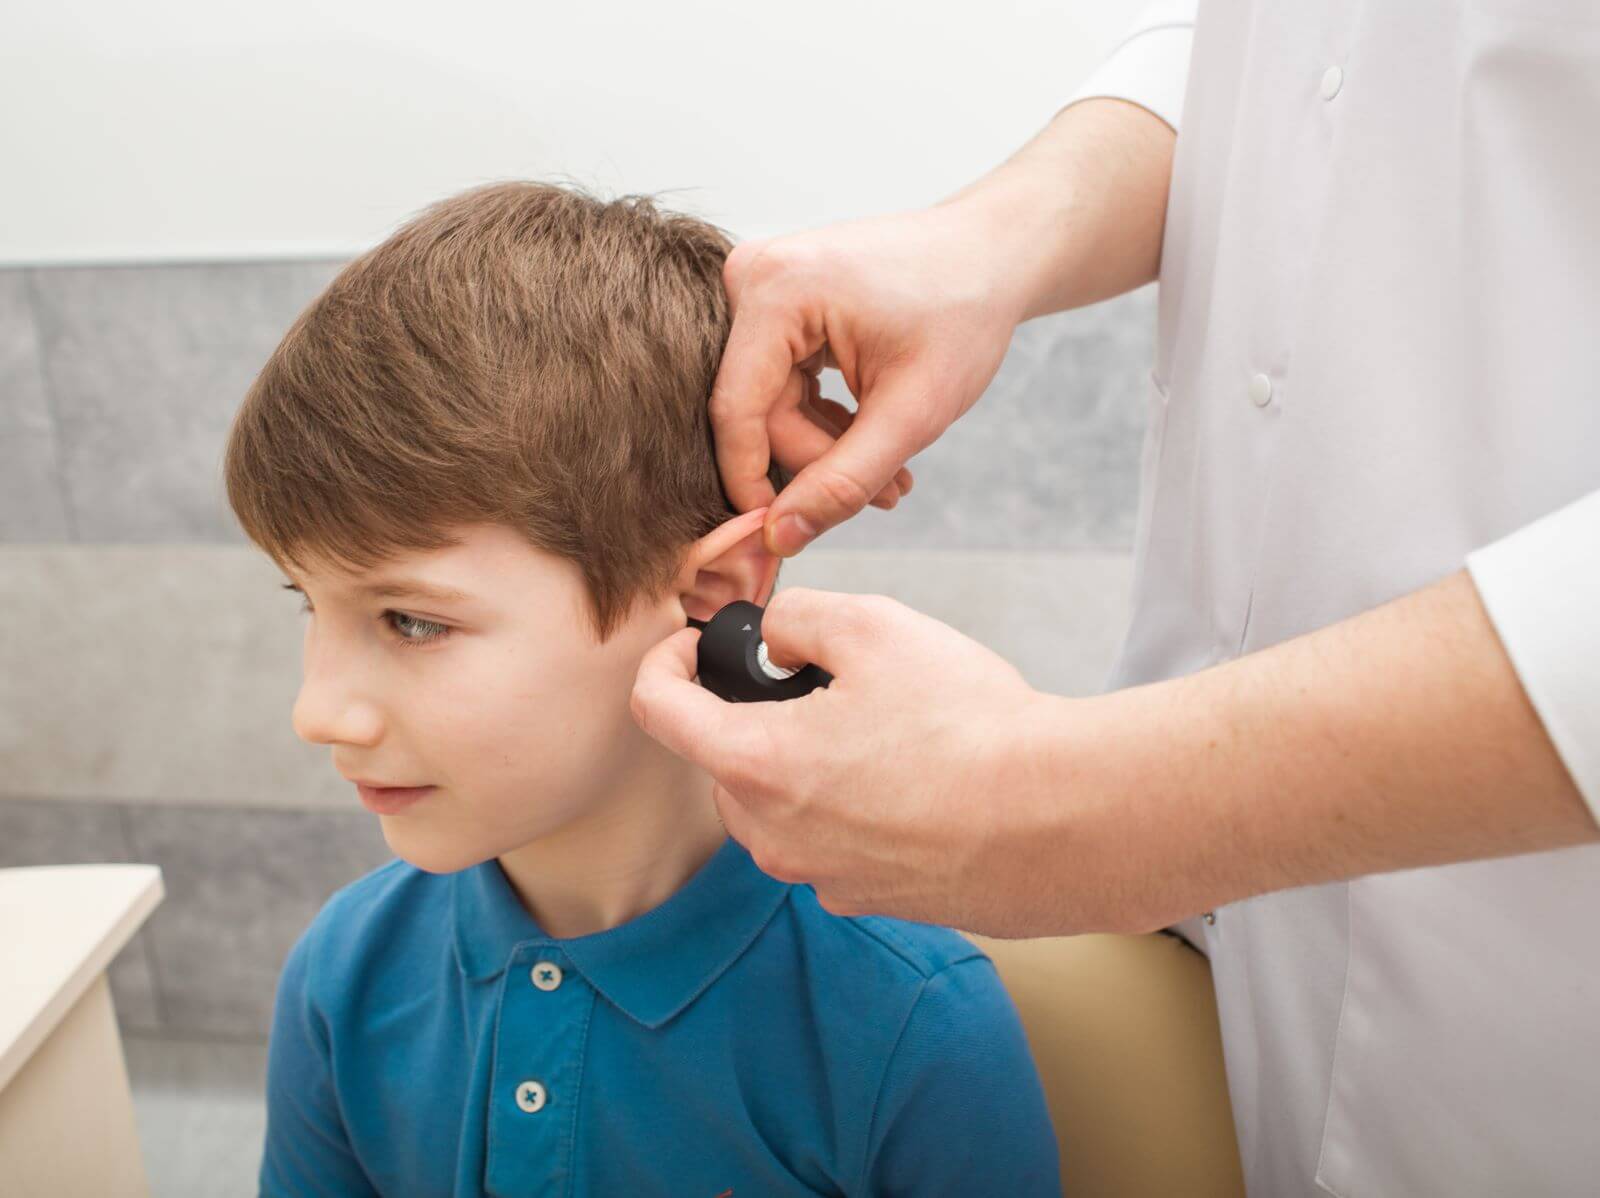 Featured image for “Noise-Induced Hearing Loss in Kids”